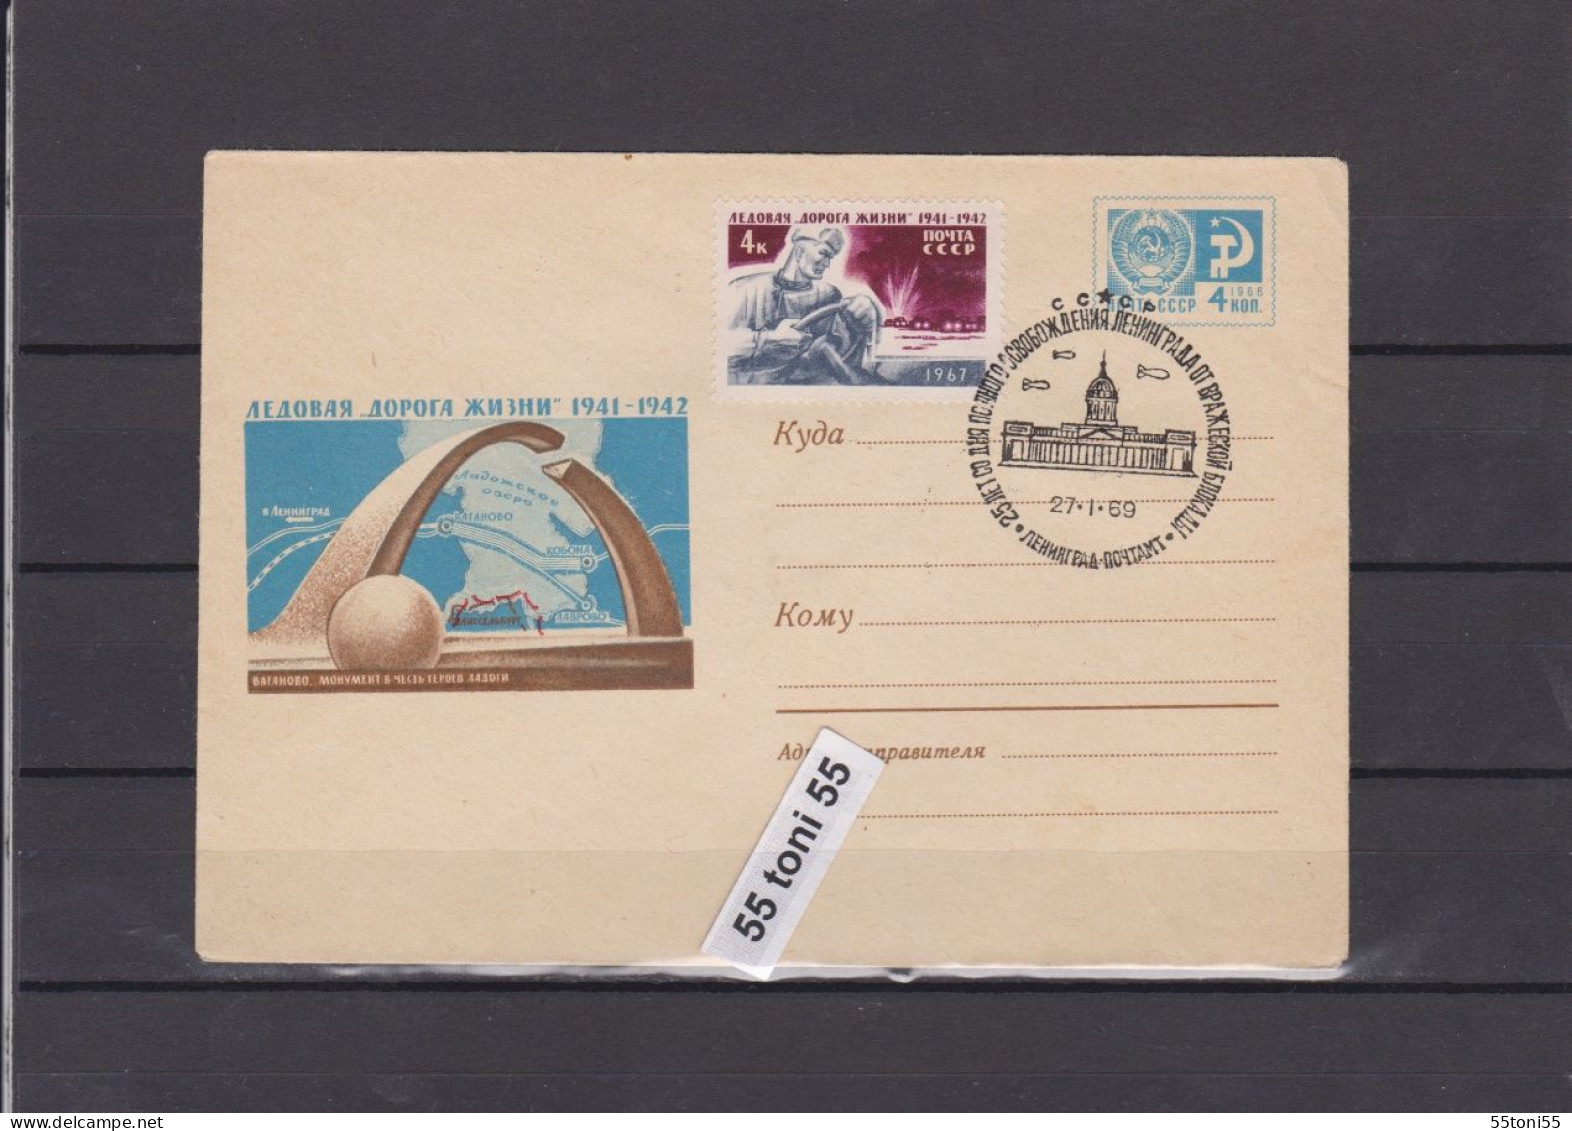 1968  4 Kop. - Ice "Road Of Life" (1941 - 1942) During The Siege Of Leningrad Postal Stationery - 1960-69